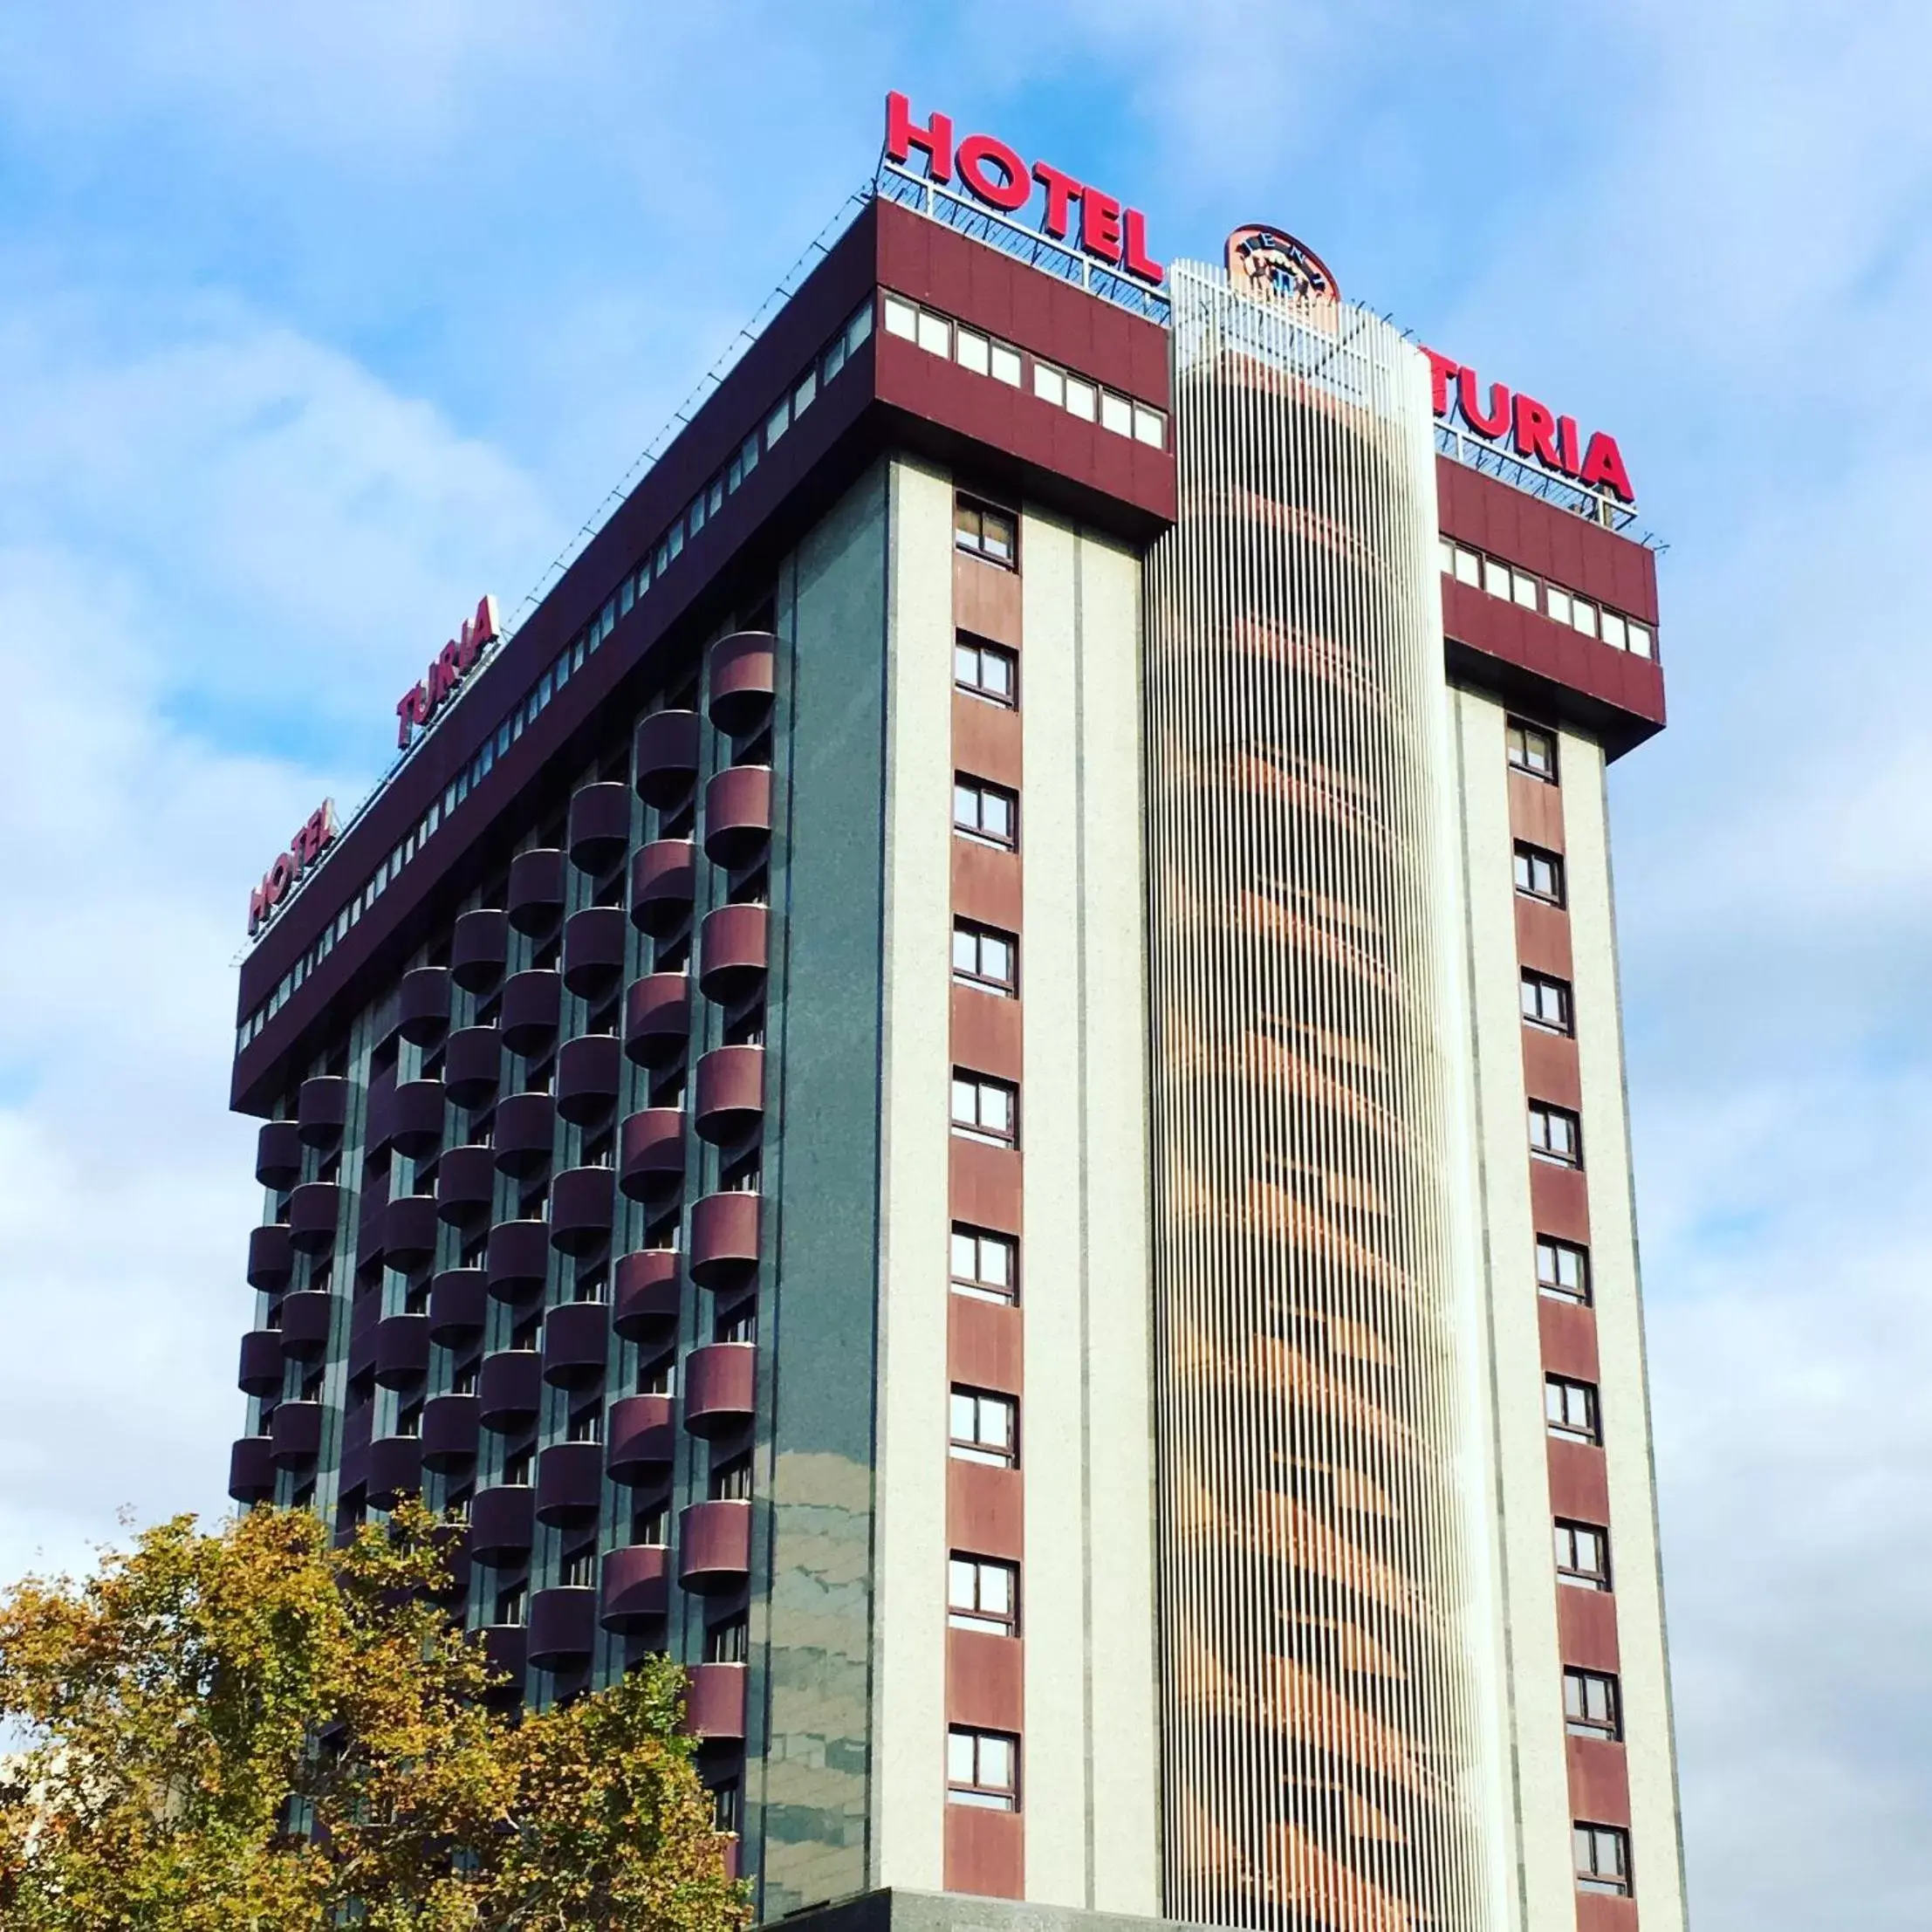 Property building in Hotel Turia